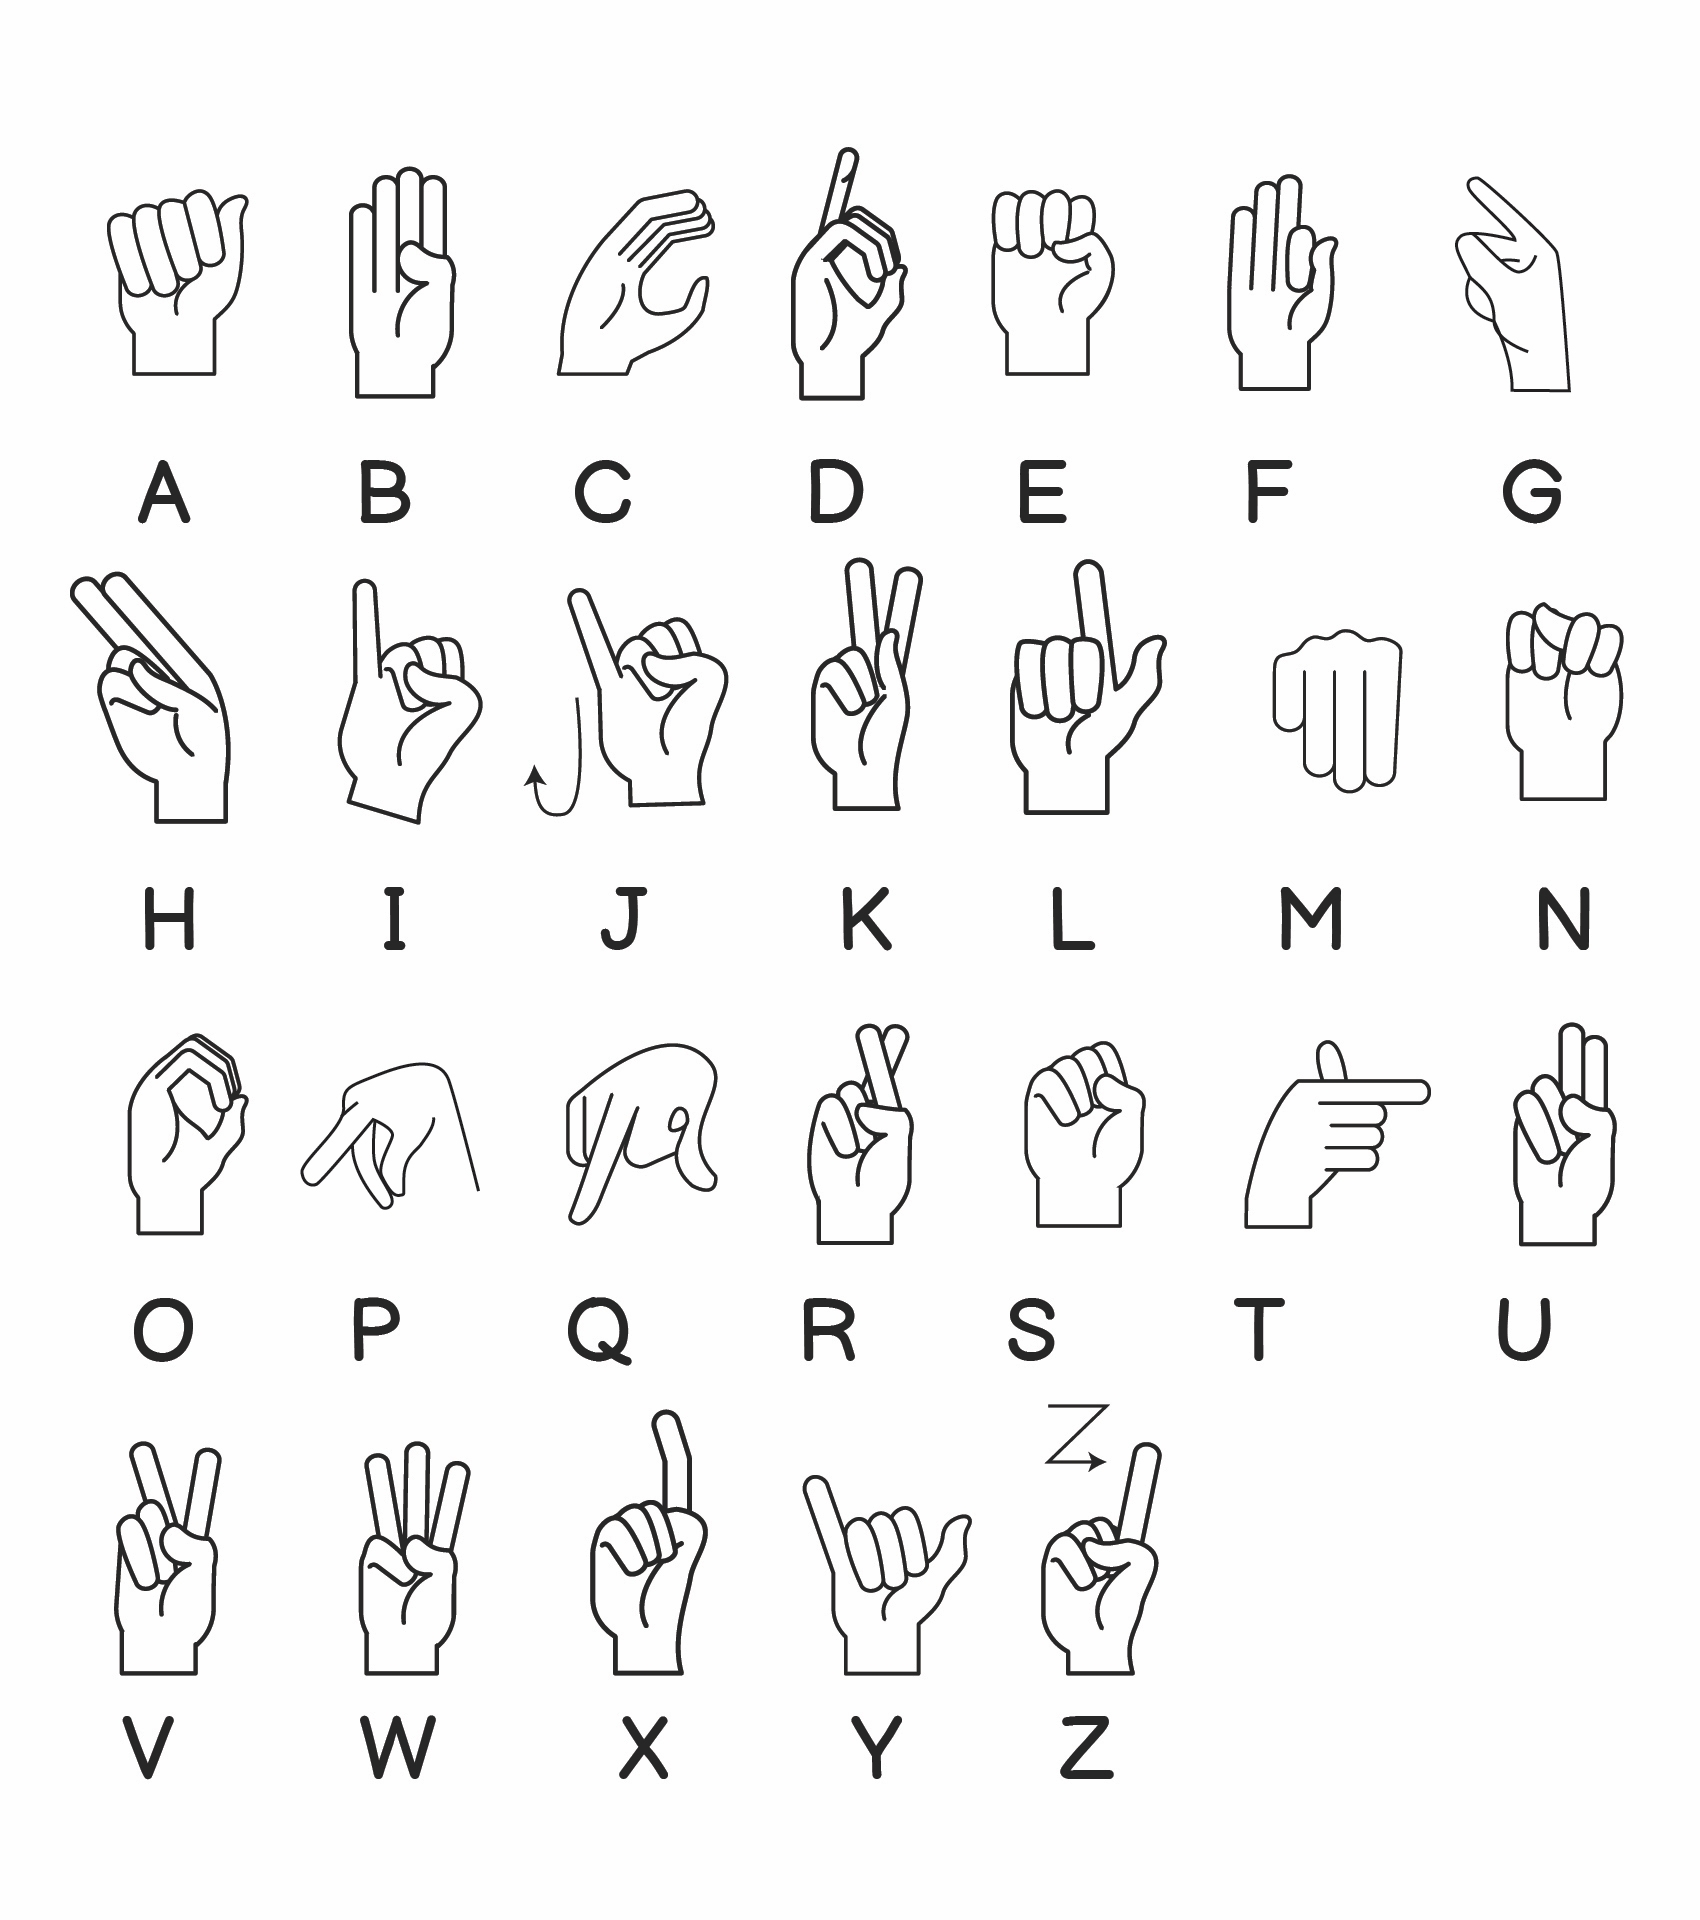 5-best-images-of-printable-american-sign-language-words-asl-american-sign-language-words-sign